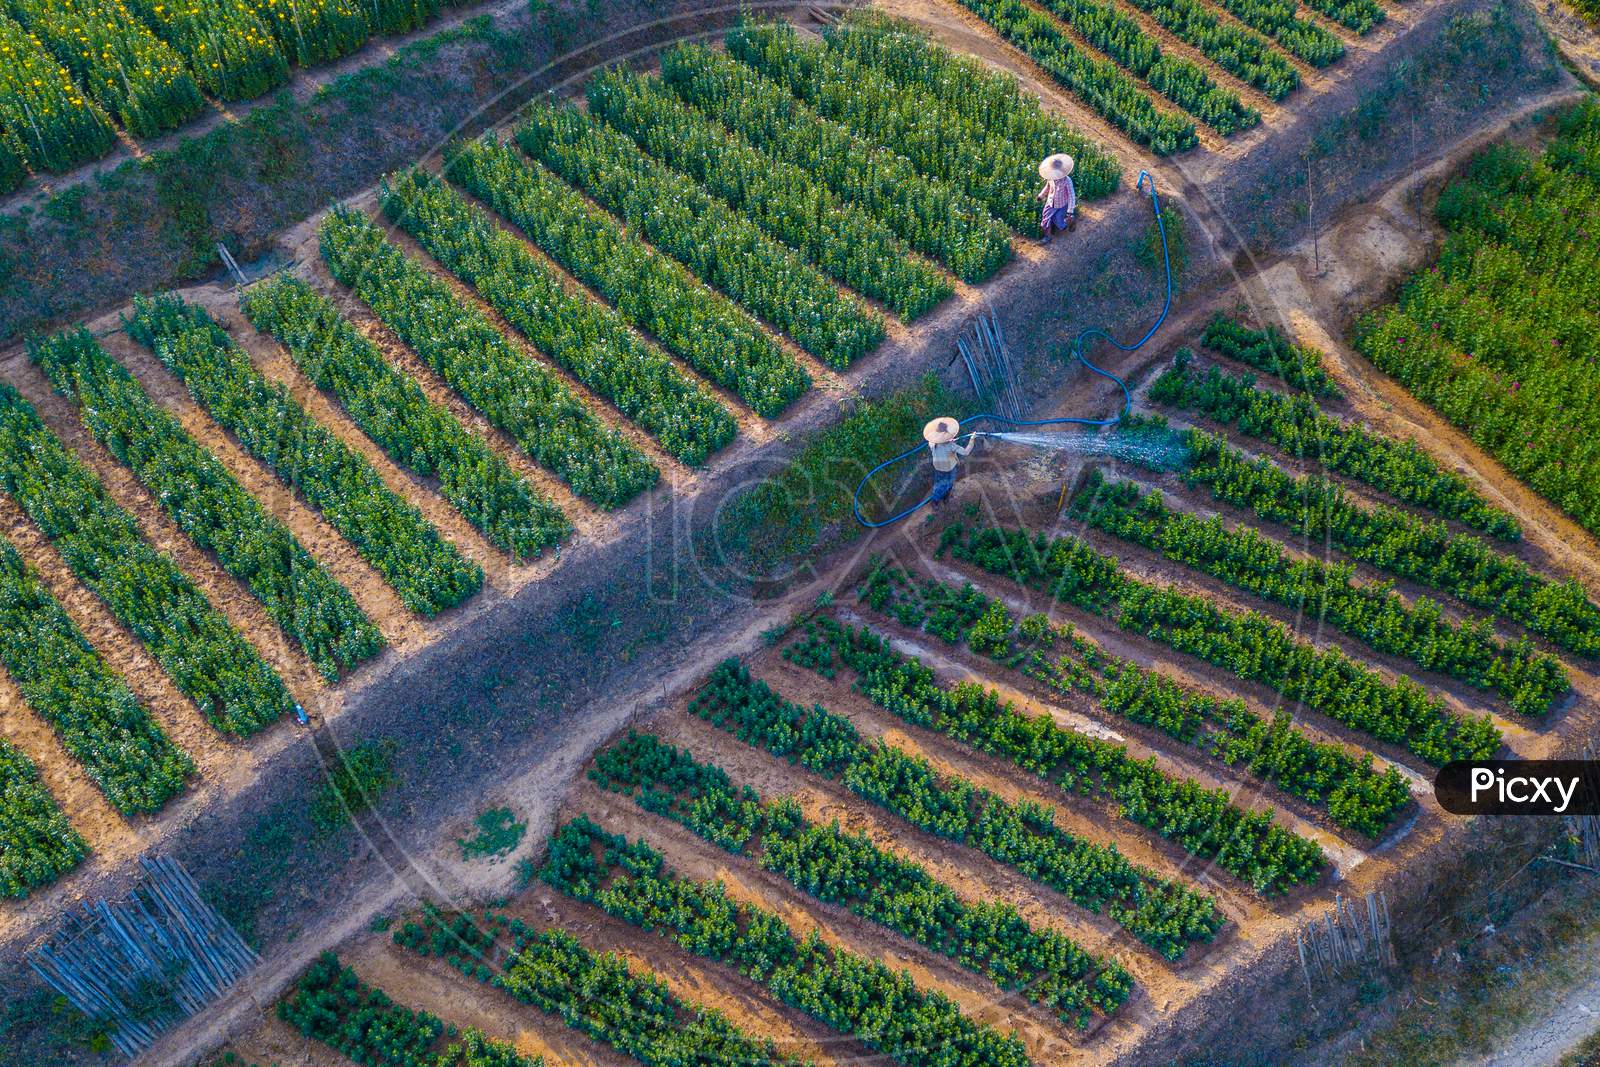 An aerial view of farmers watering an agricultural field